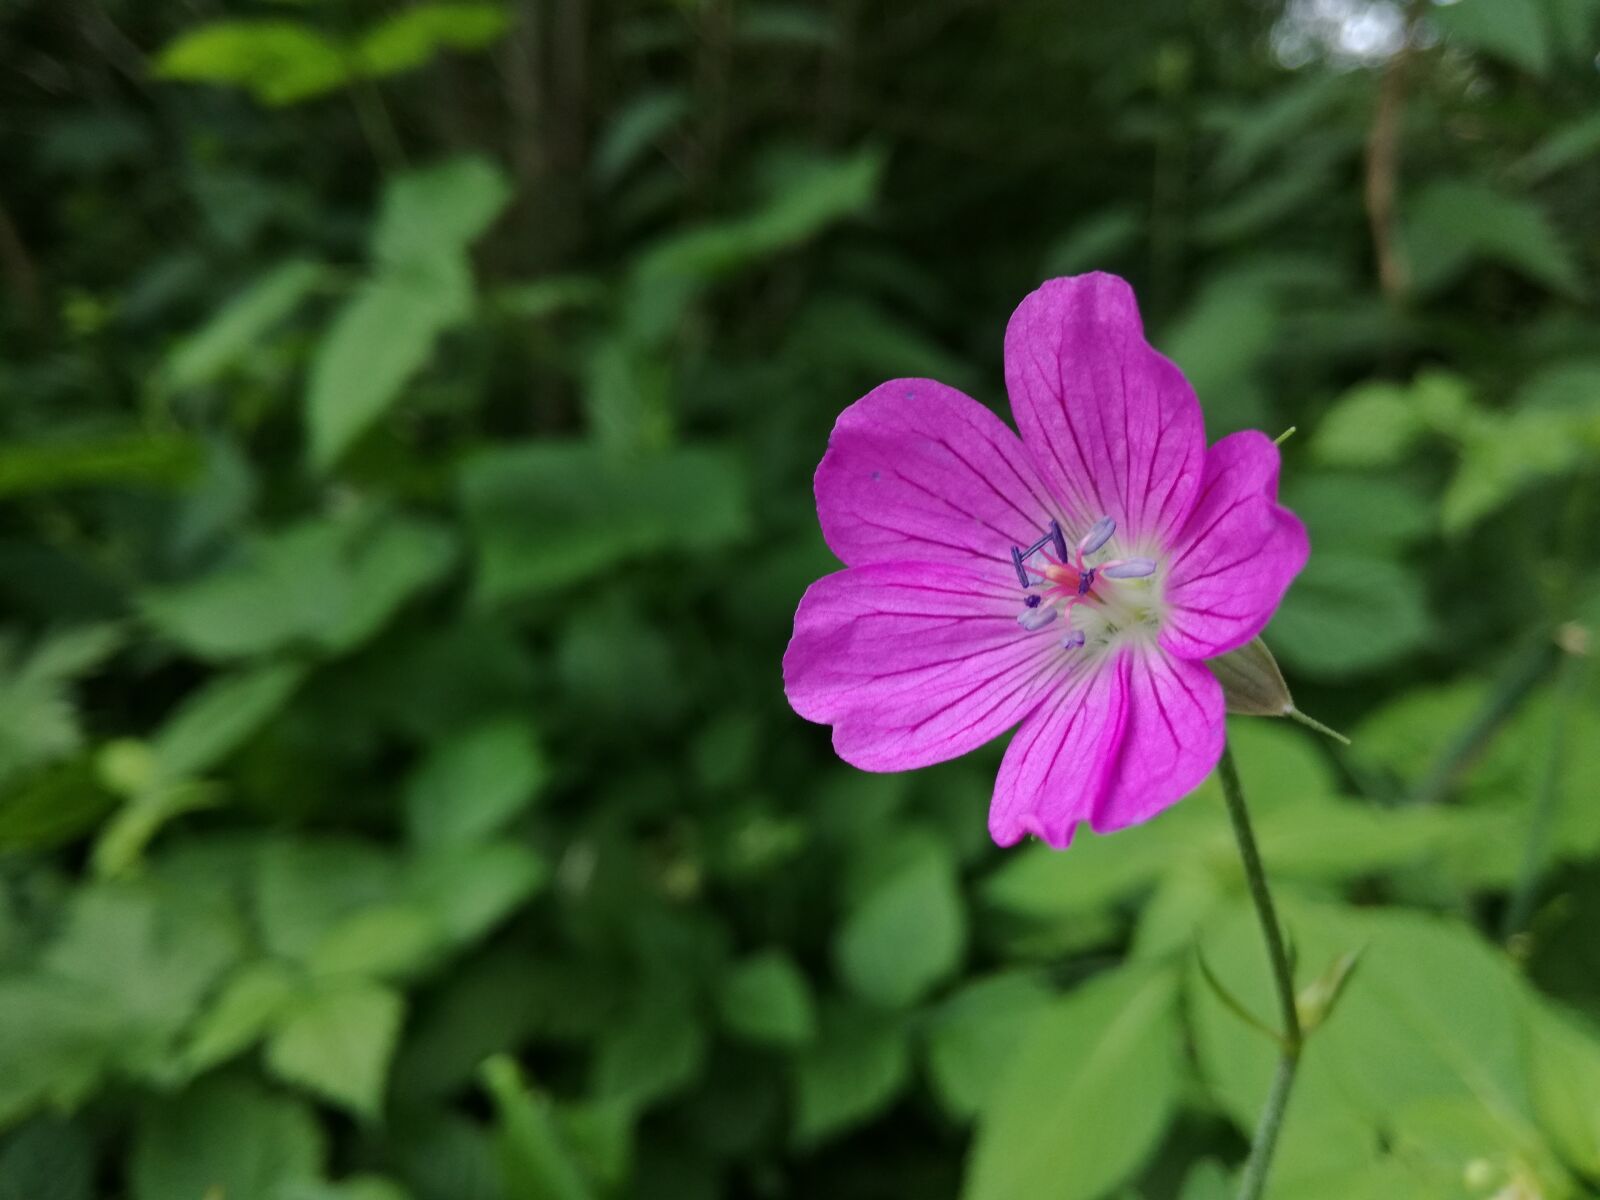 HUAWEI P9 LITE sample photo. Flower, meadow, nature photography